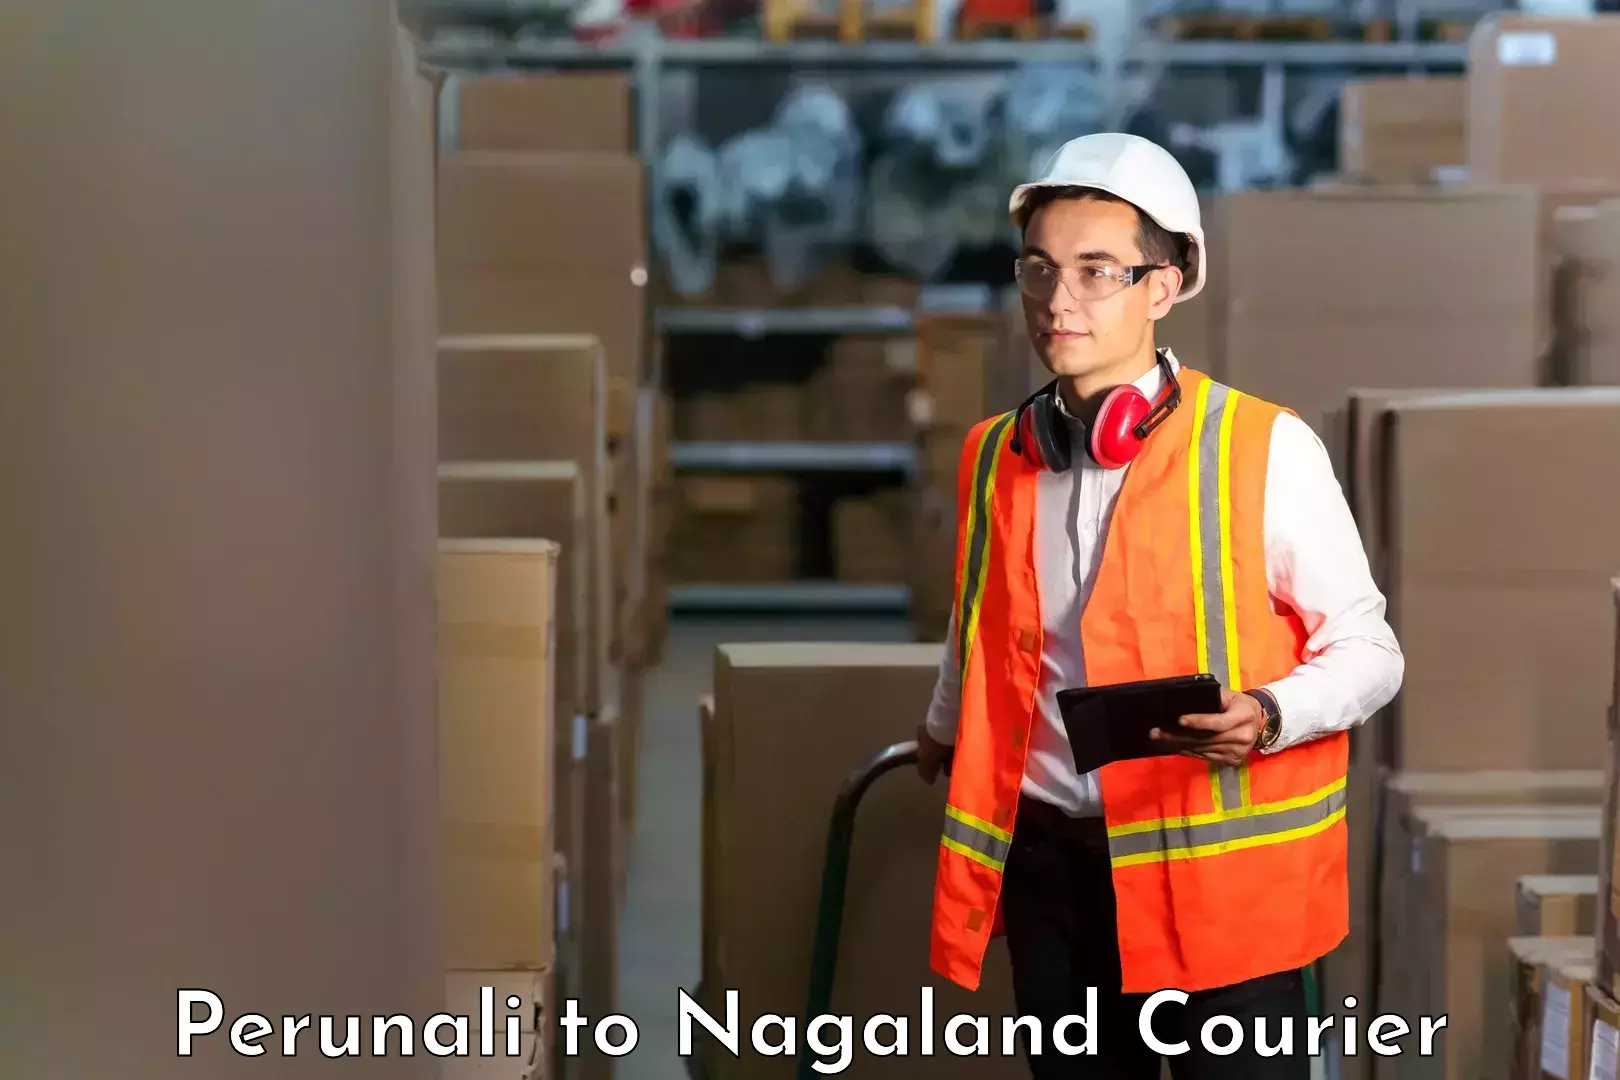 Subscription-based courier Perunali to Nagaland